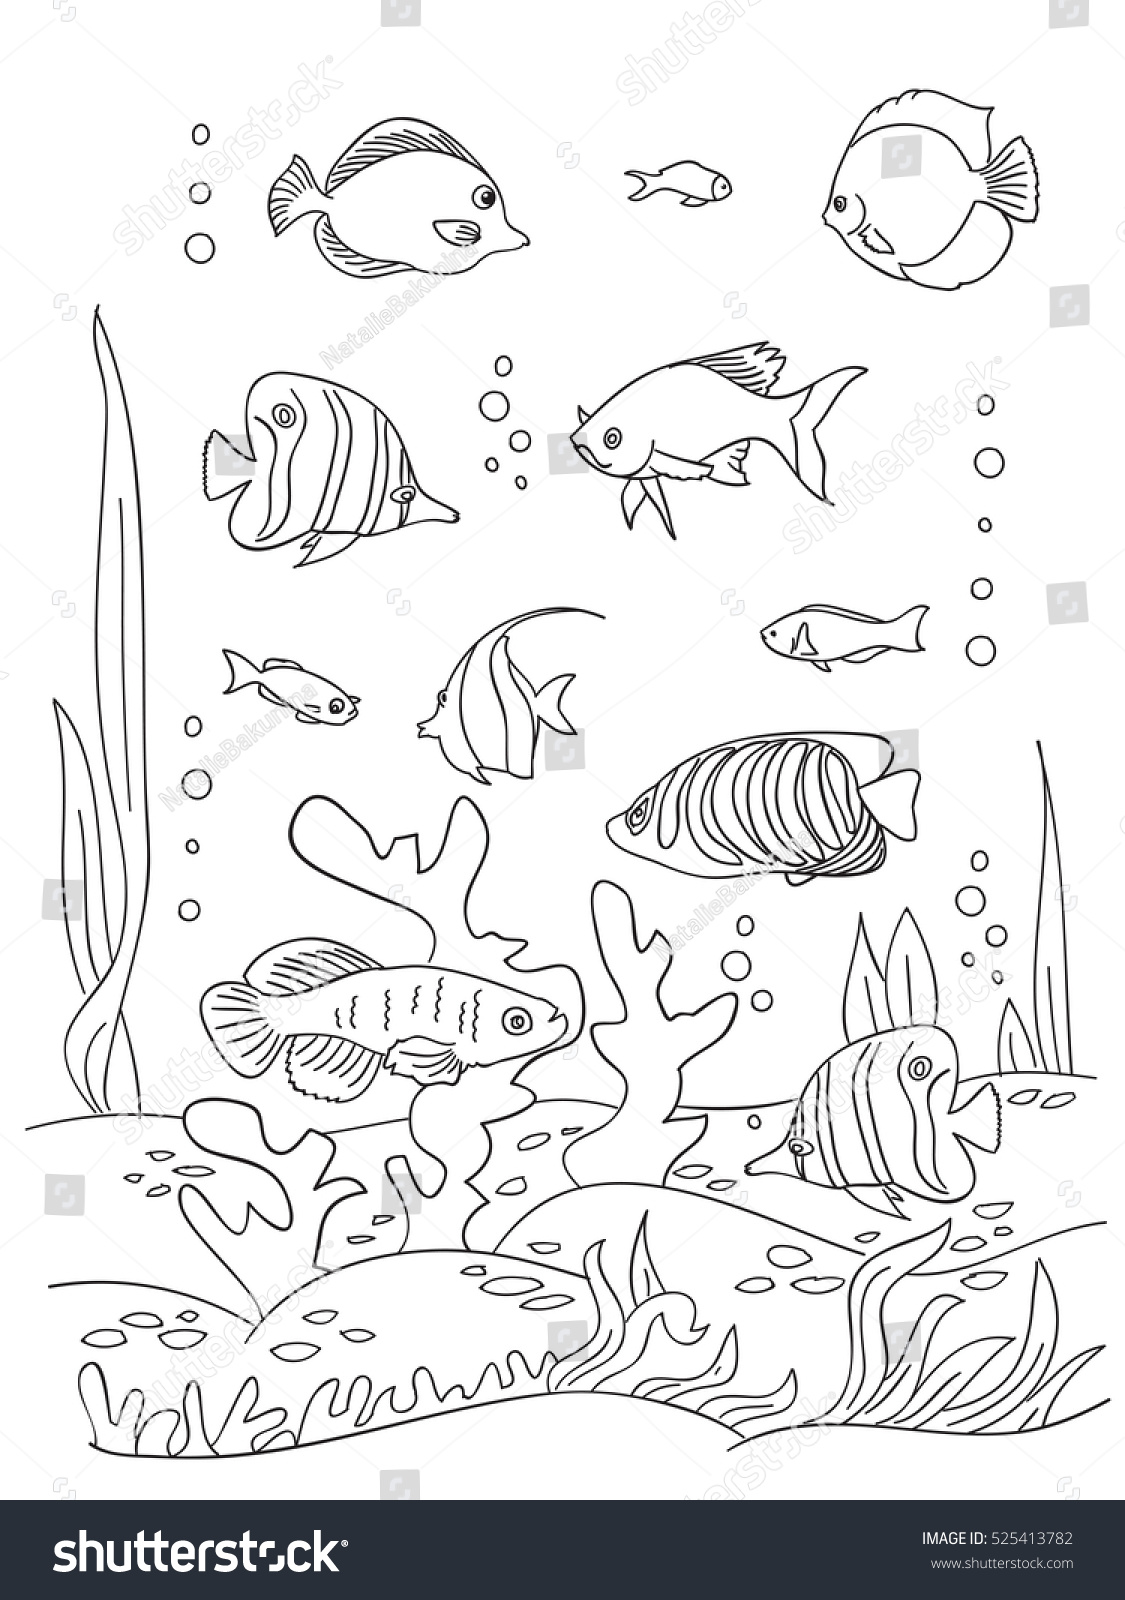 Coloring Book Page Black Wight Ocean Stock Vector 525413782 - Shutterstock